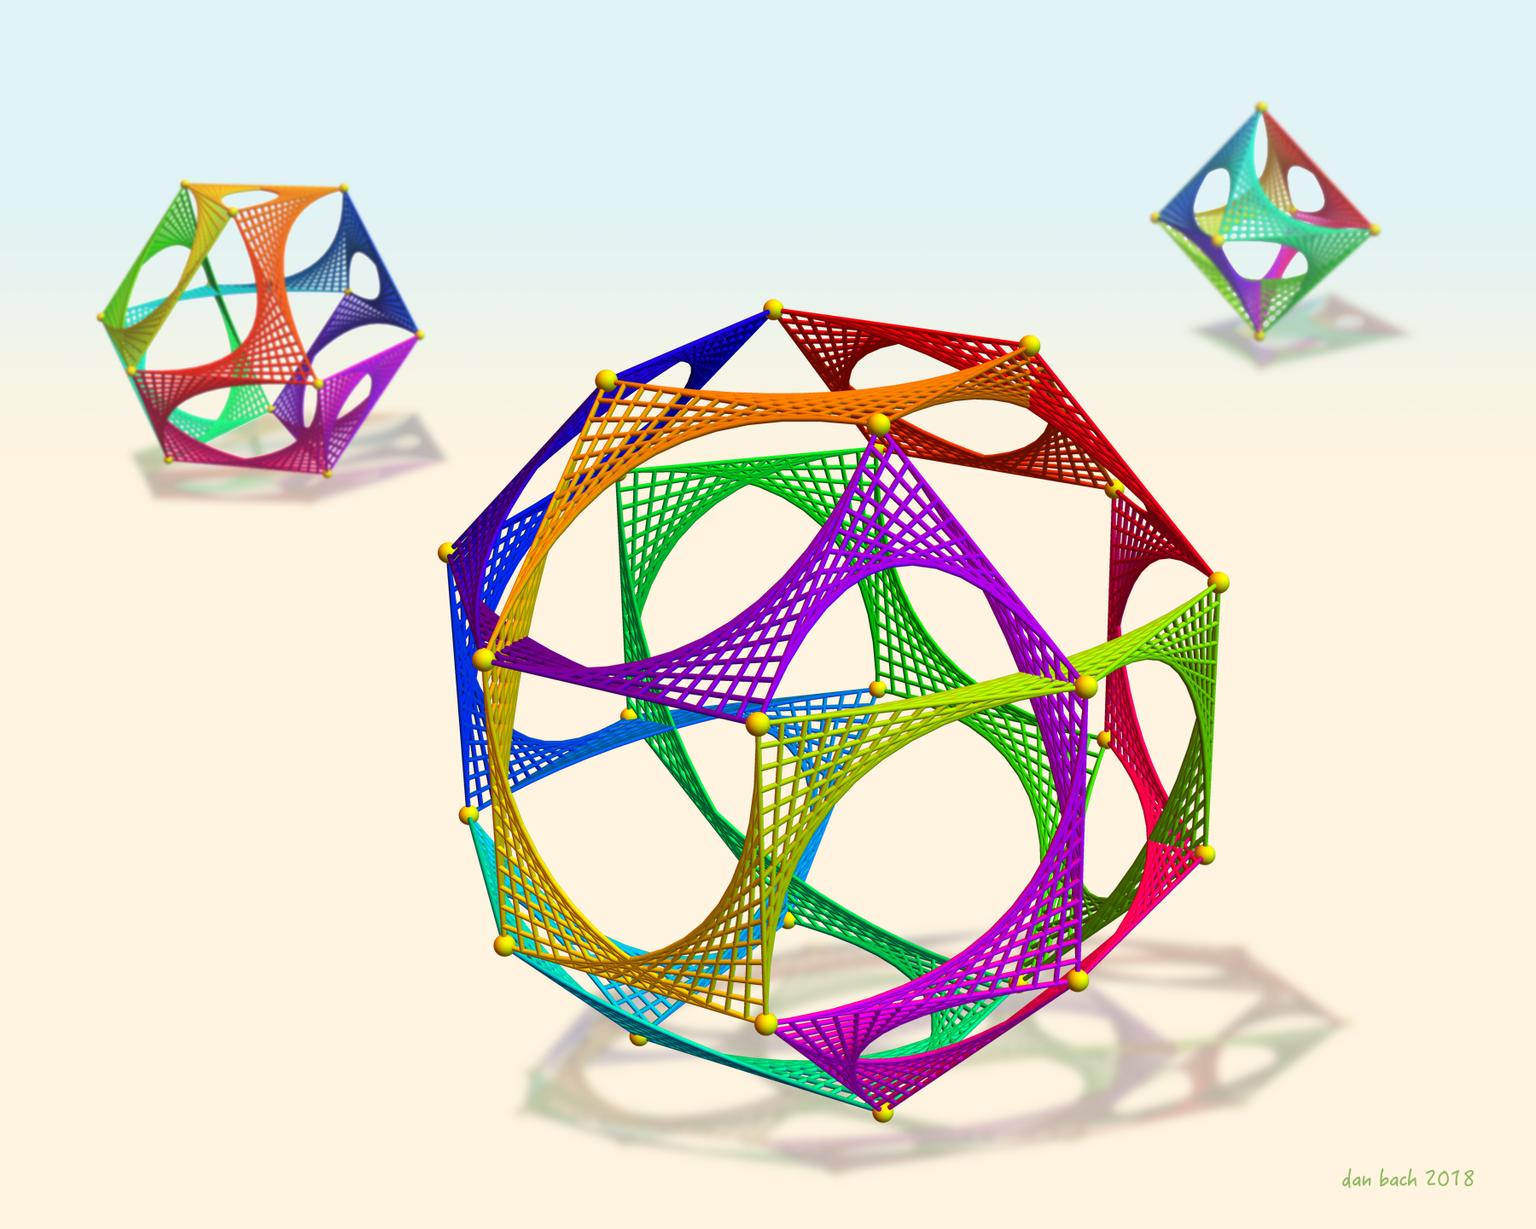 Image for entry 'String Circuit Polyhedra'